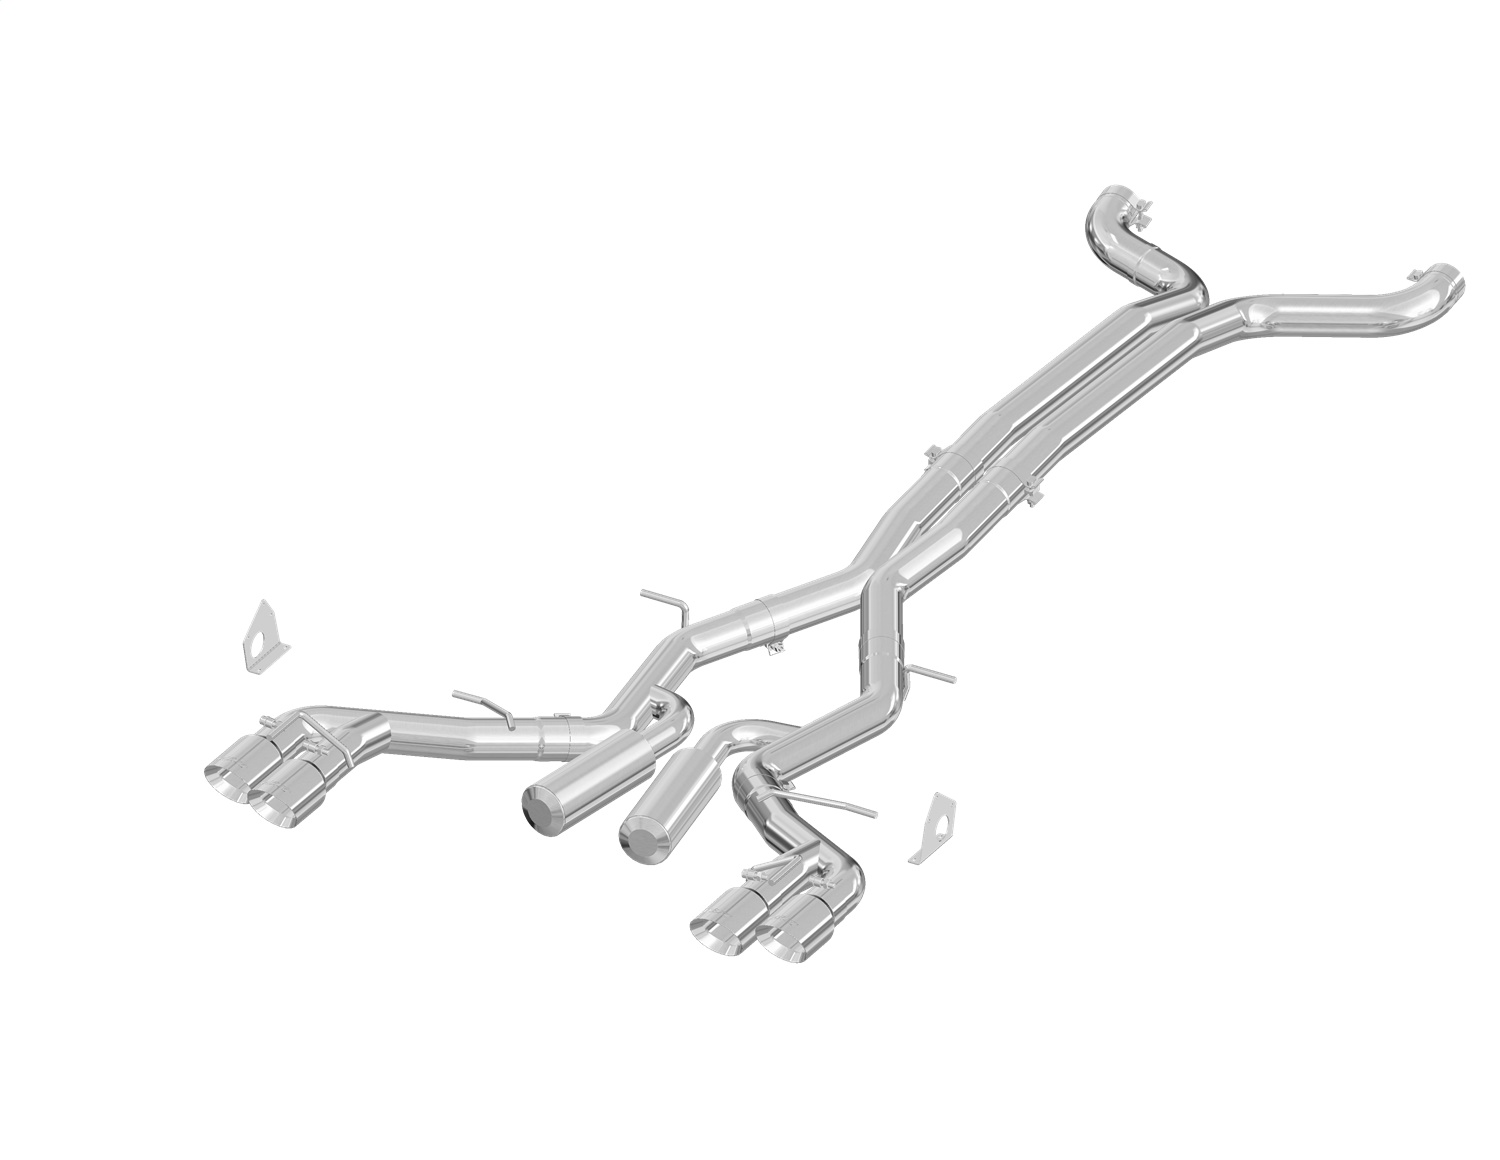 MBRP Exhaust S7033409 Armor Plus Cat Back Exhaust System Fits 16-24 Camaro